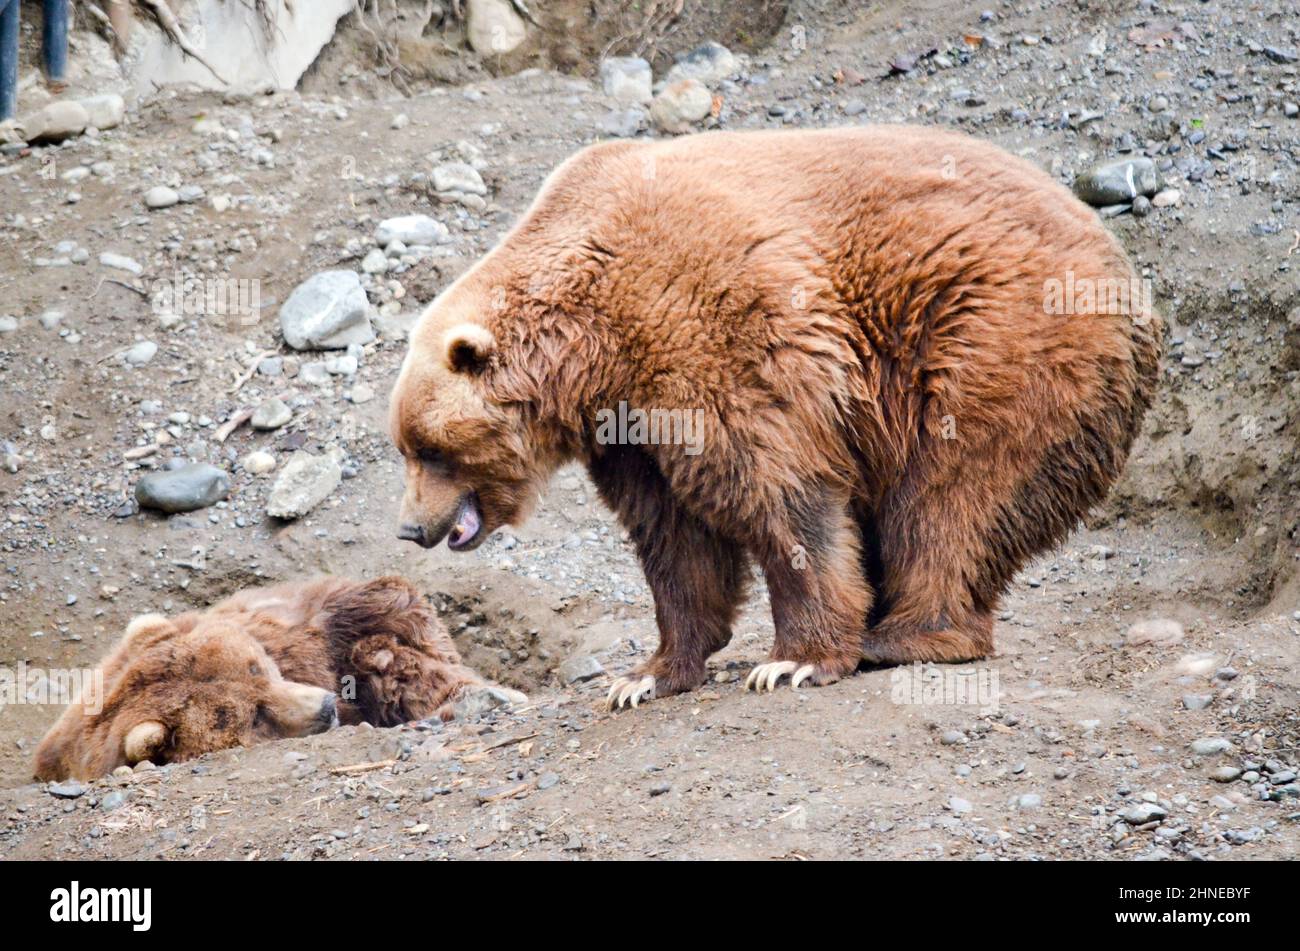 Spectacular grizzly bears resting in holes of soil dug by them in zoo in Alaska, USA, United States of America Stock Photo